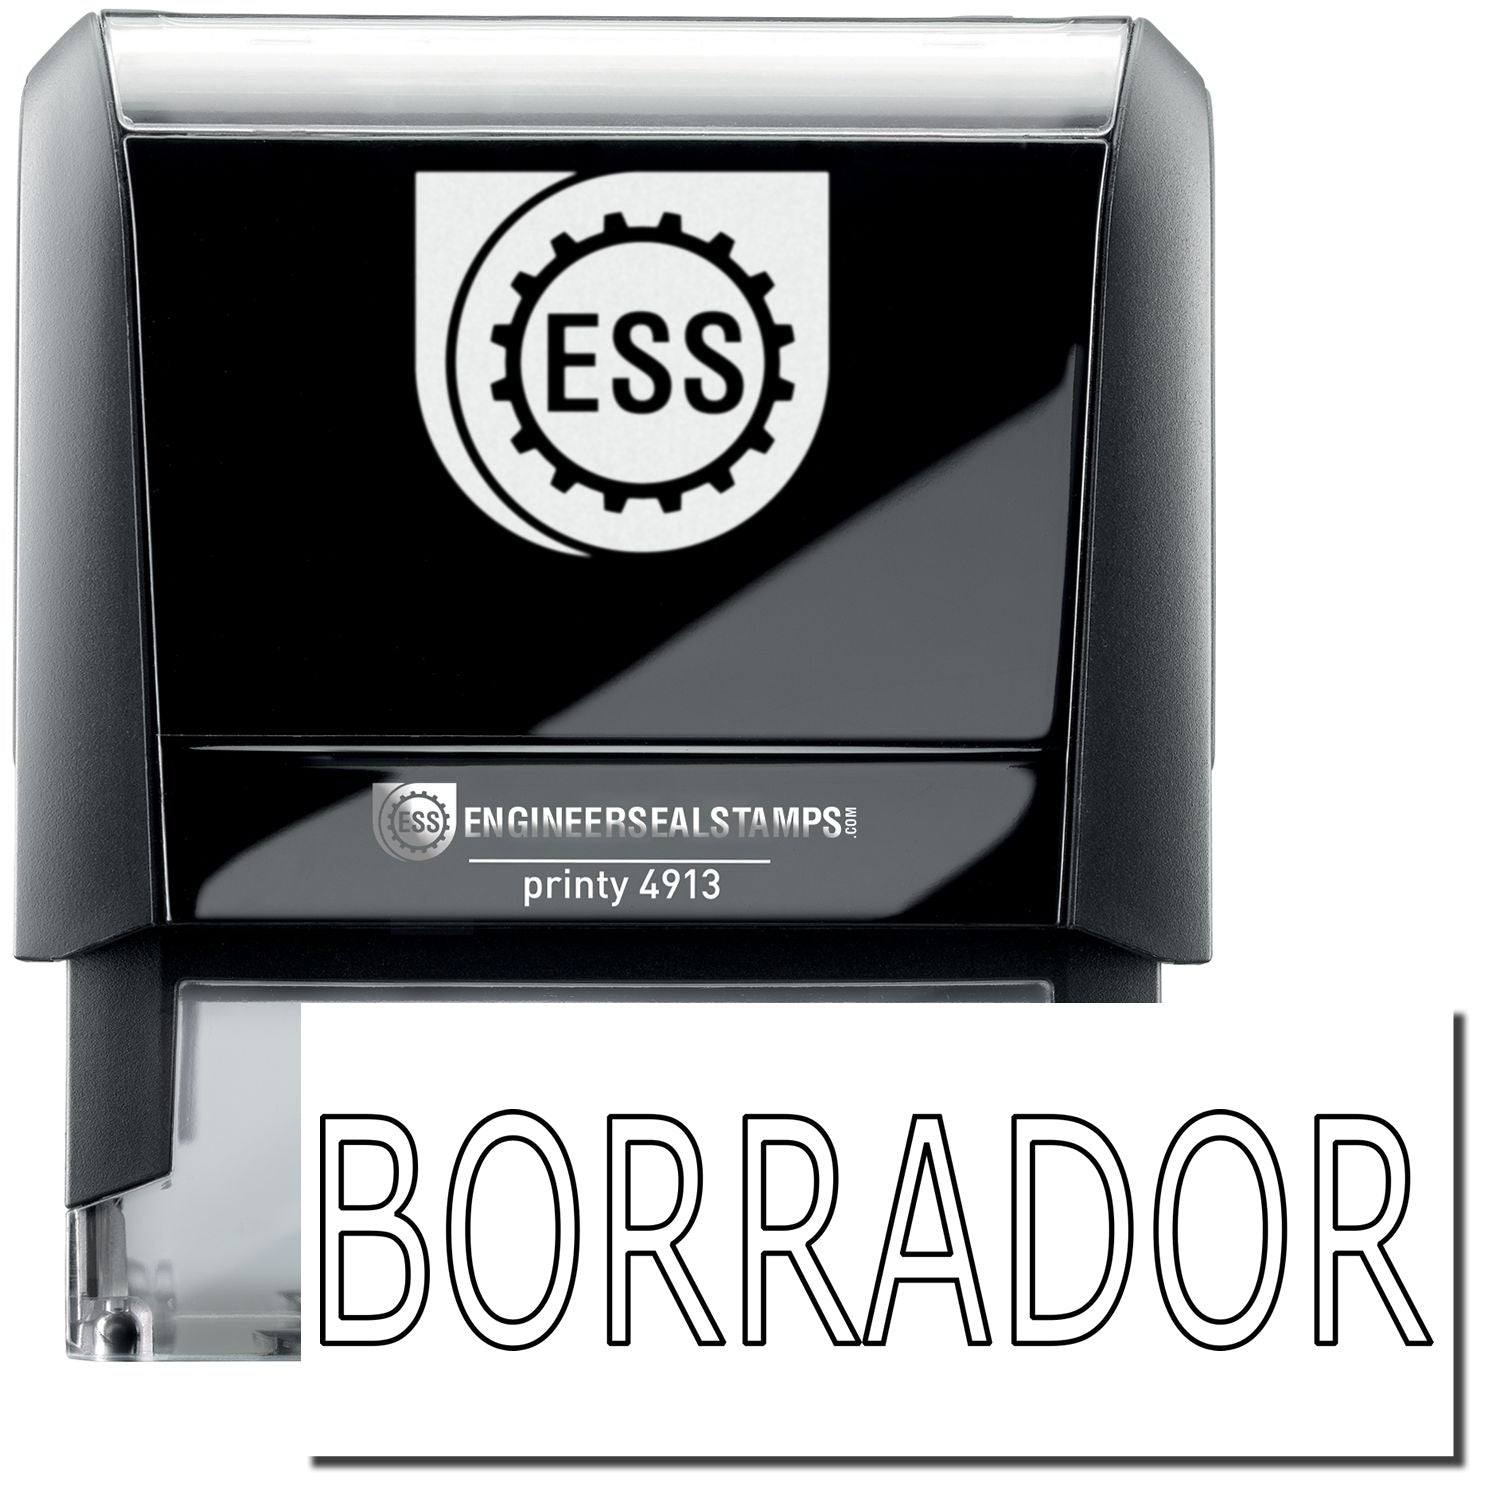 A self-inking stamp with a stamped image showing how the text "BORRADOR" in a large outline style is displayed by it after stamping.